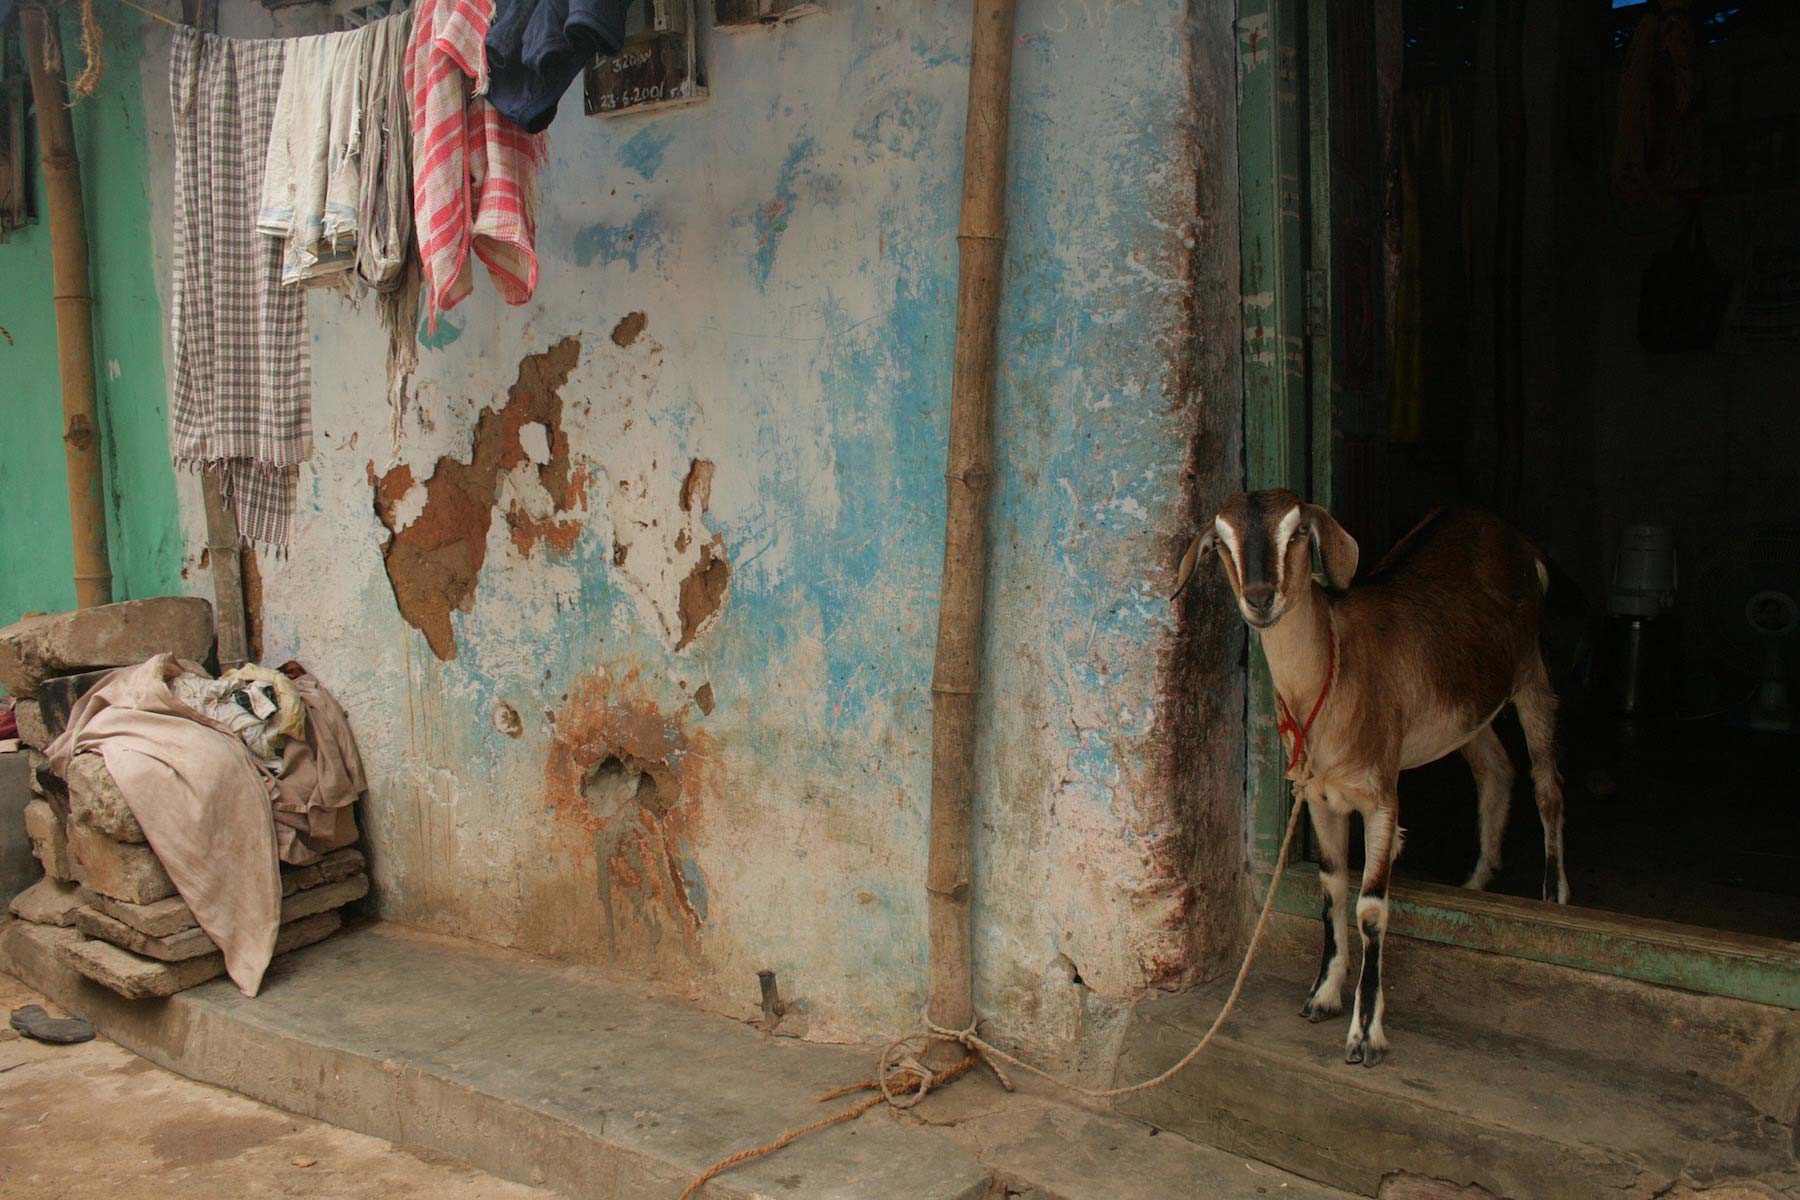 A goat in India